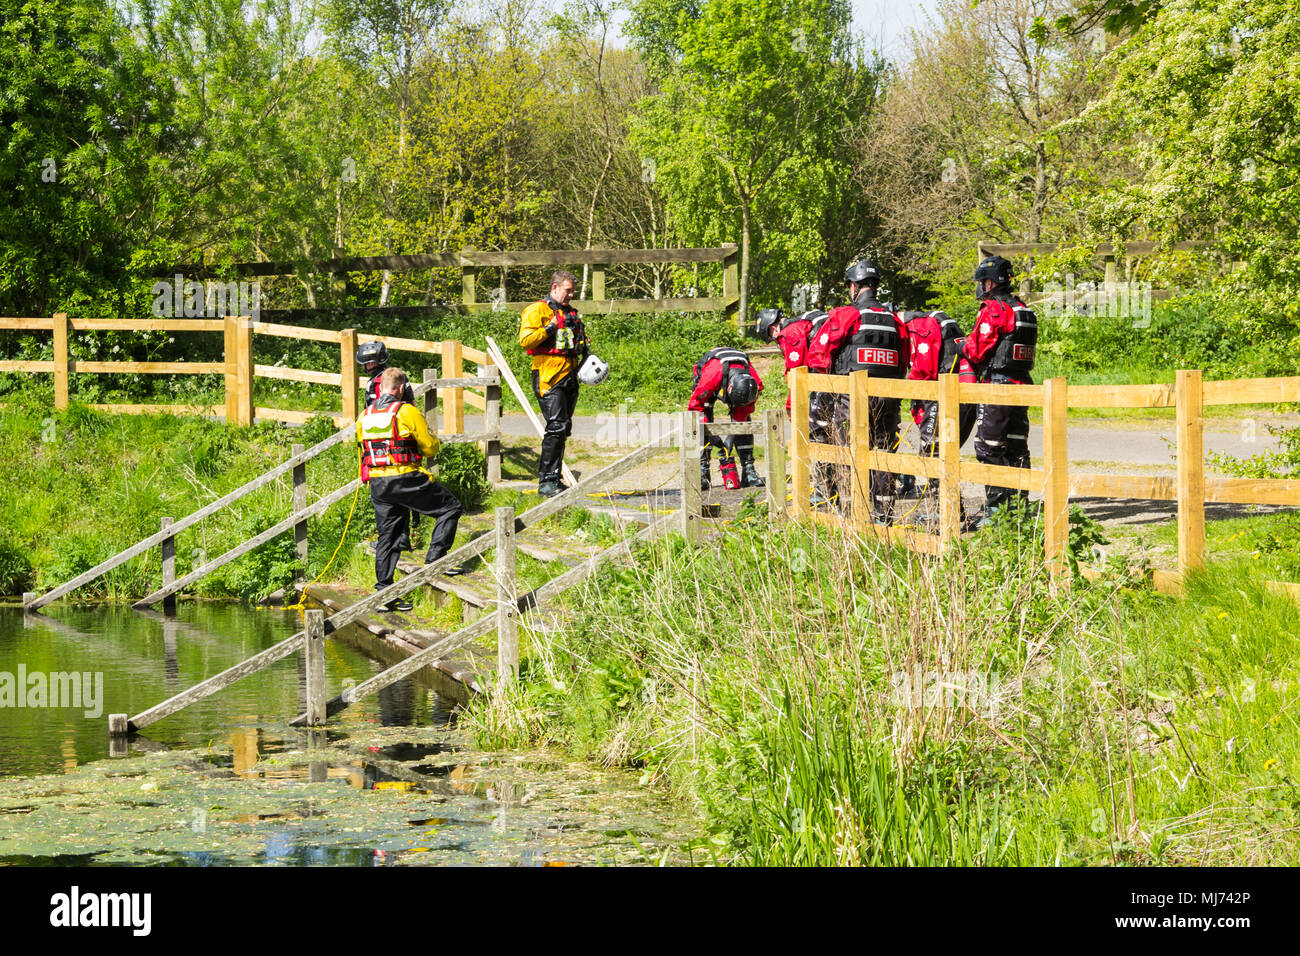 Members of Greater Manchester Fire and Rescue Service undertaking water rescue training at Burrs Activity Centre, Burrs Country Park, Bury. Stock Photo